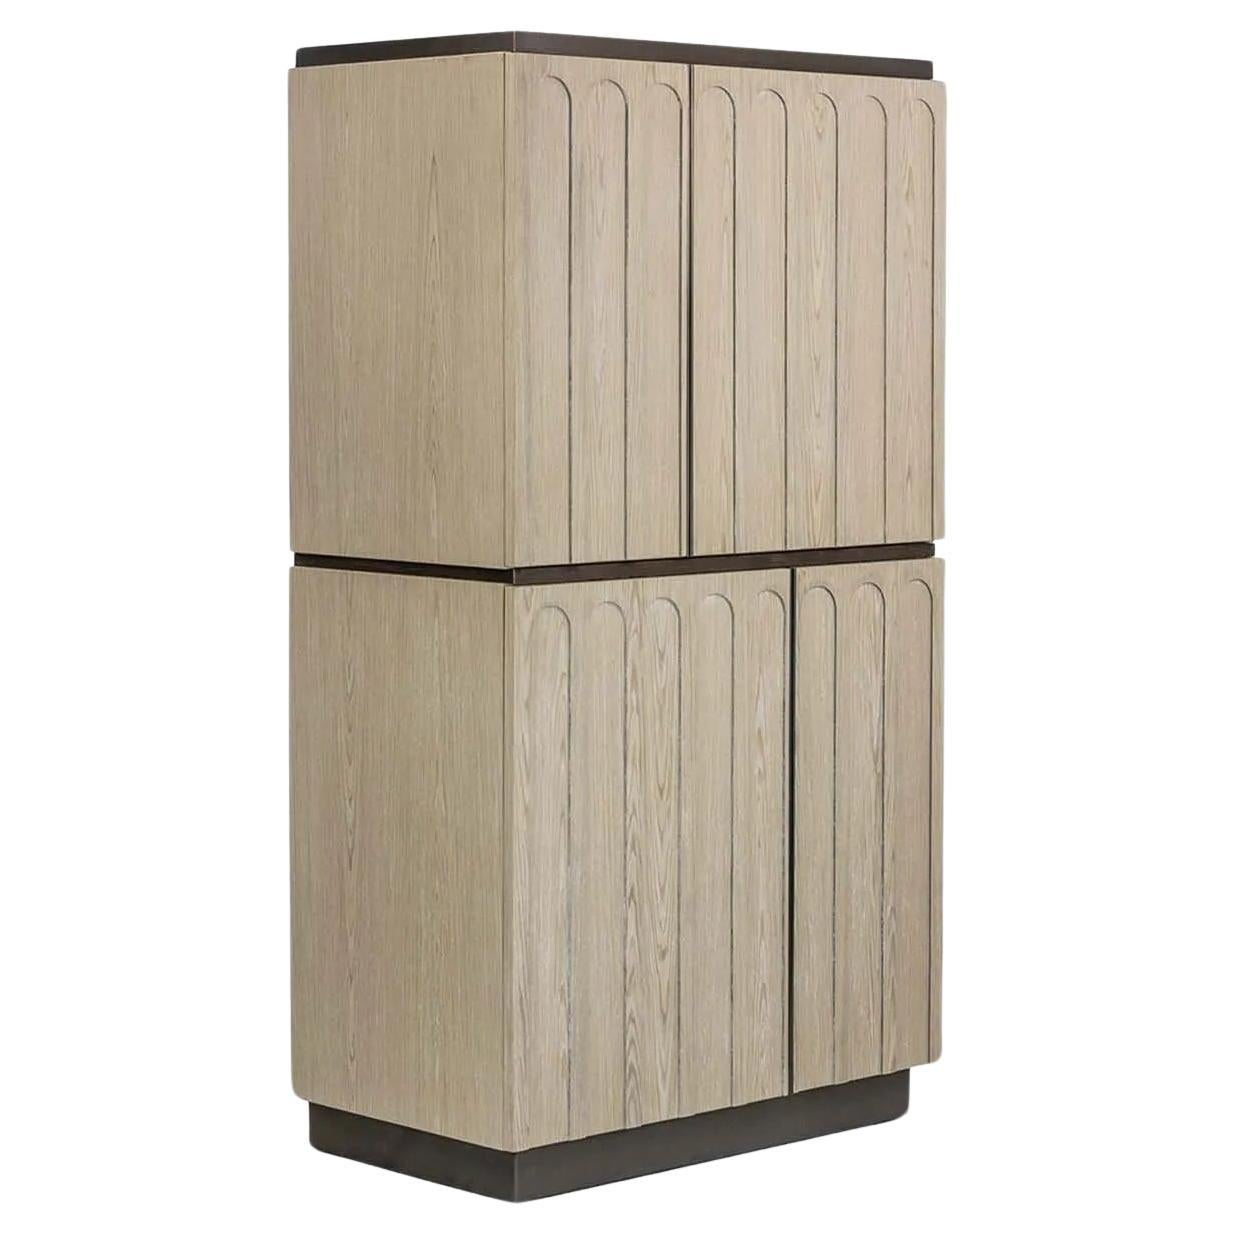 A four-door cabinet with an asymmetrical and dynamic design featuring varying-sized doors arranged with purposeful intent. The embossed archways on the door faces add a touch of texture and detail to its artful composition. The base and details in